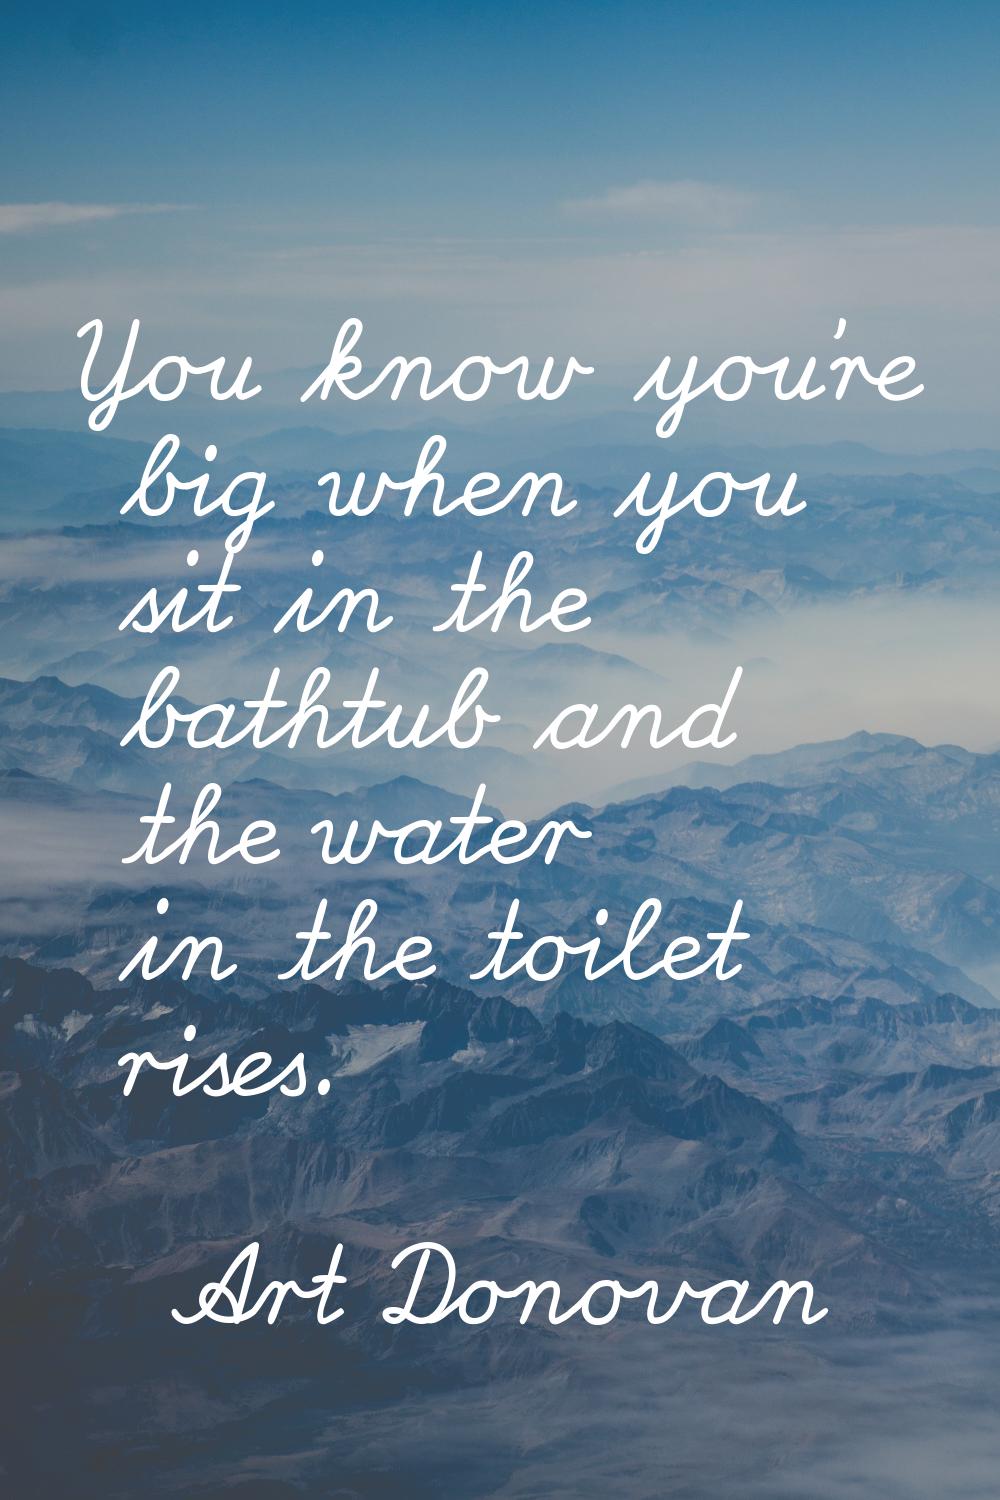 You know you're big when you sit in the bathtub and the water in the toilet rises.